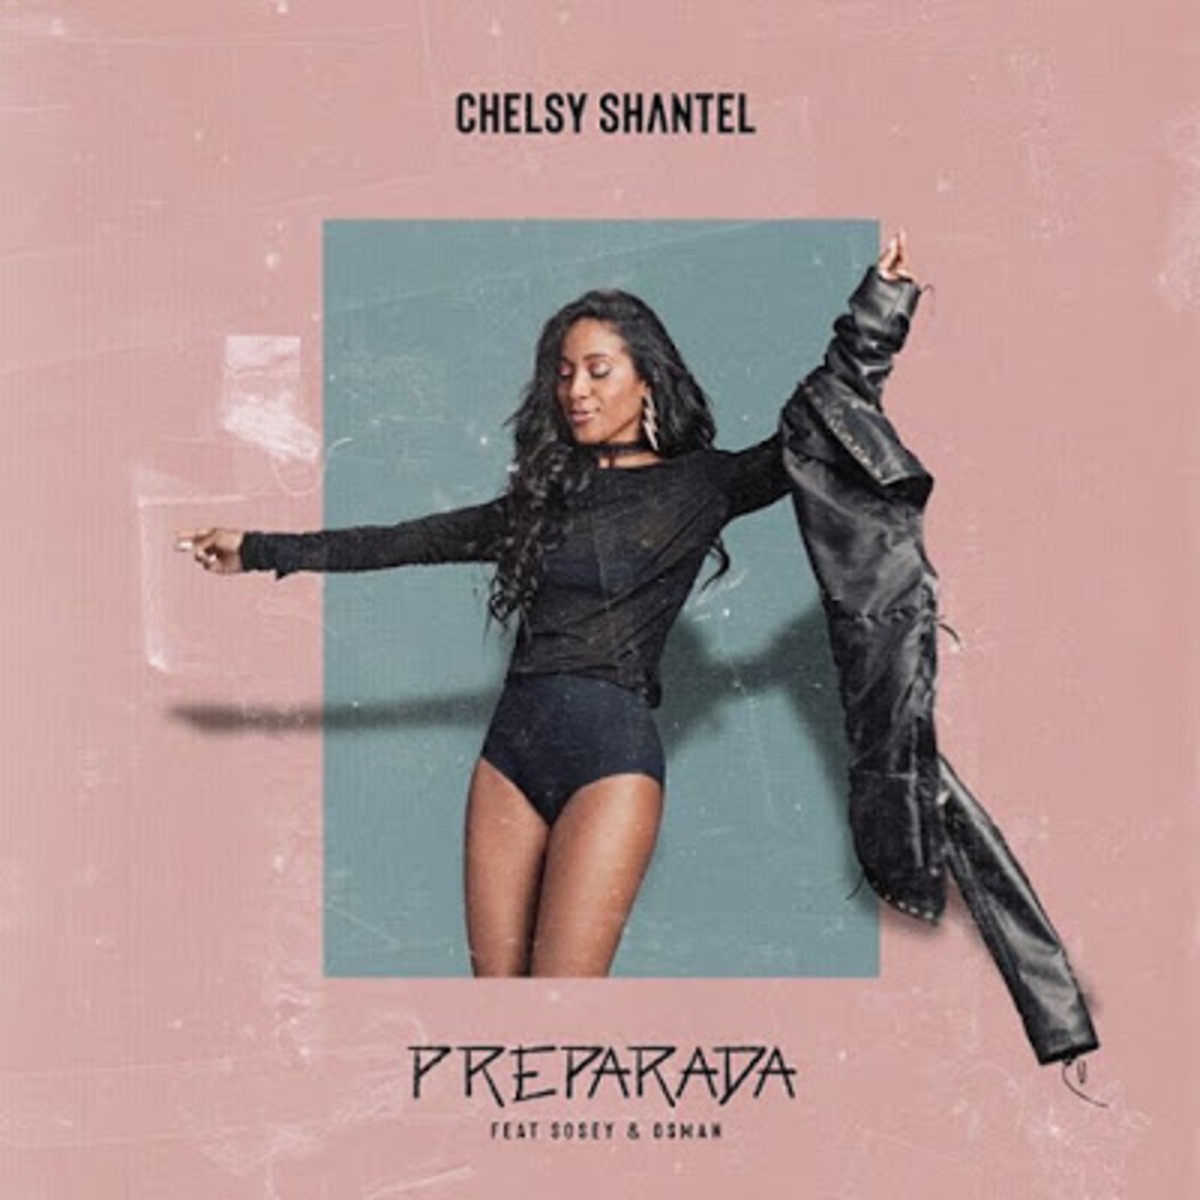 Here I Am by Chelsy Shantel on Apple Music